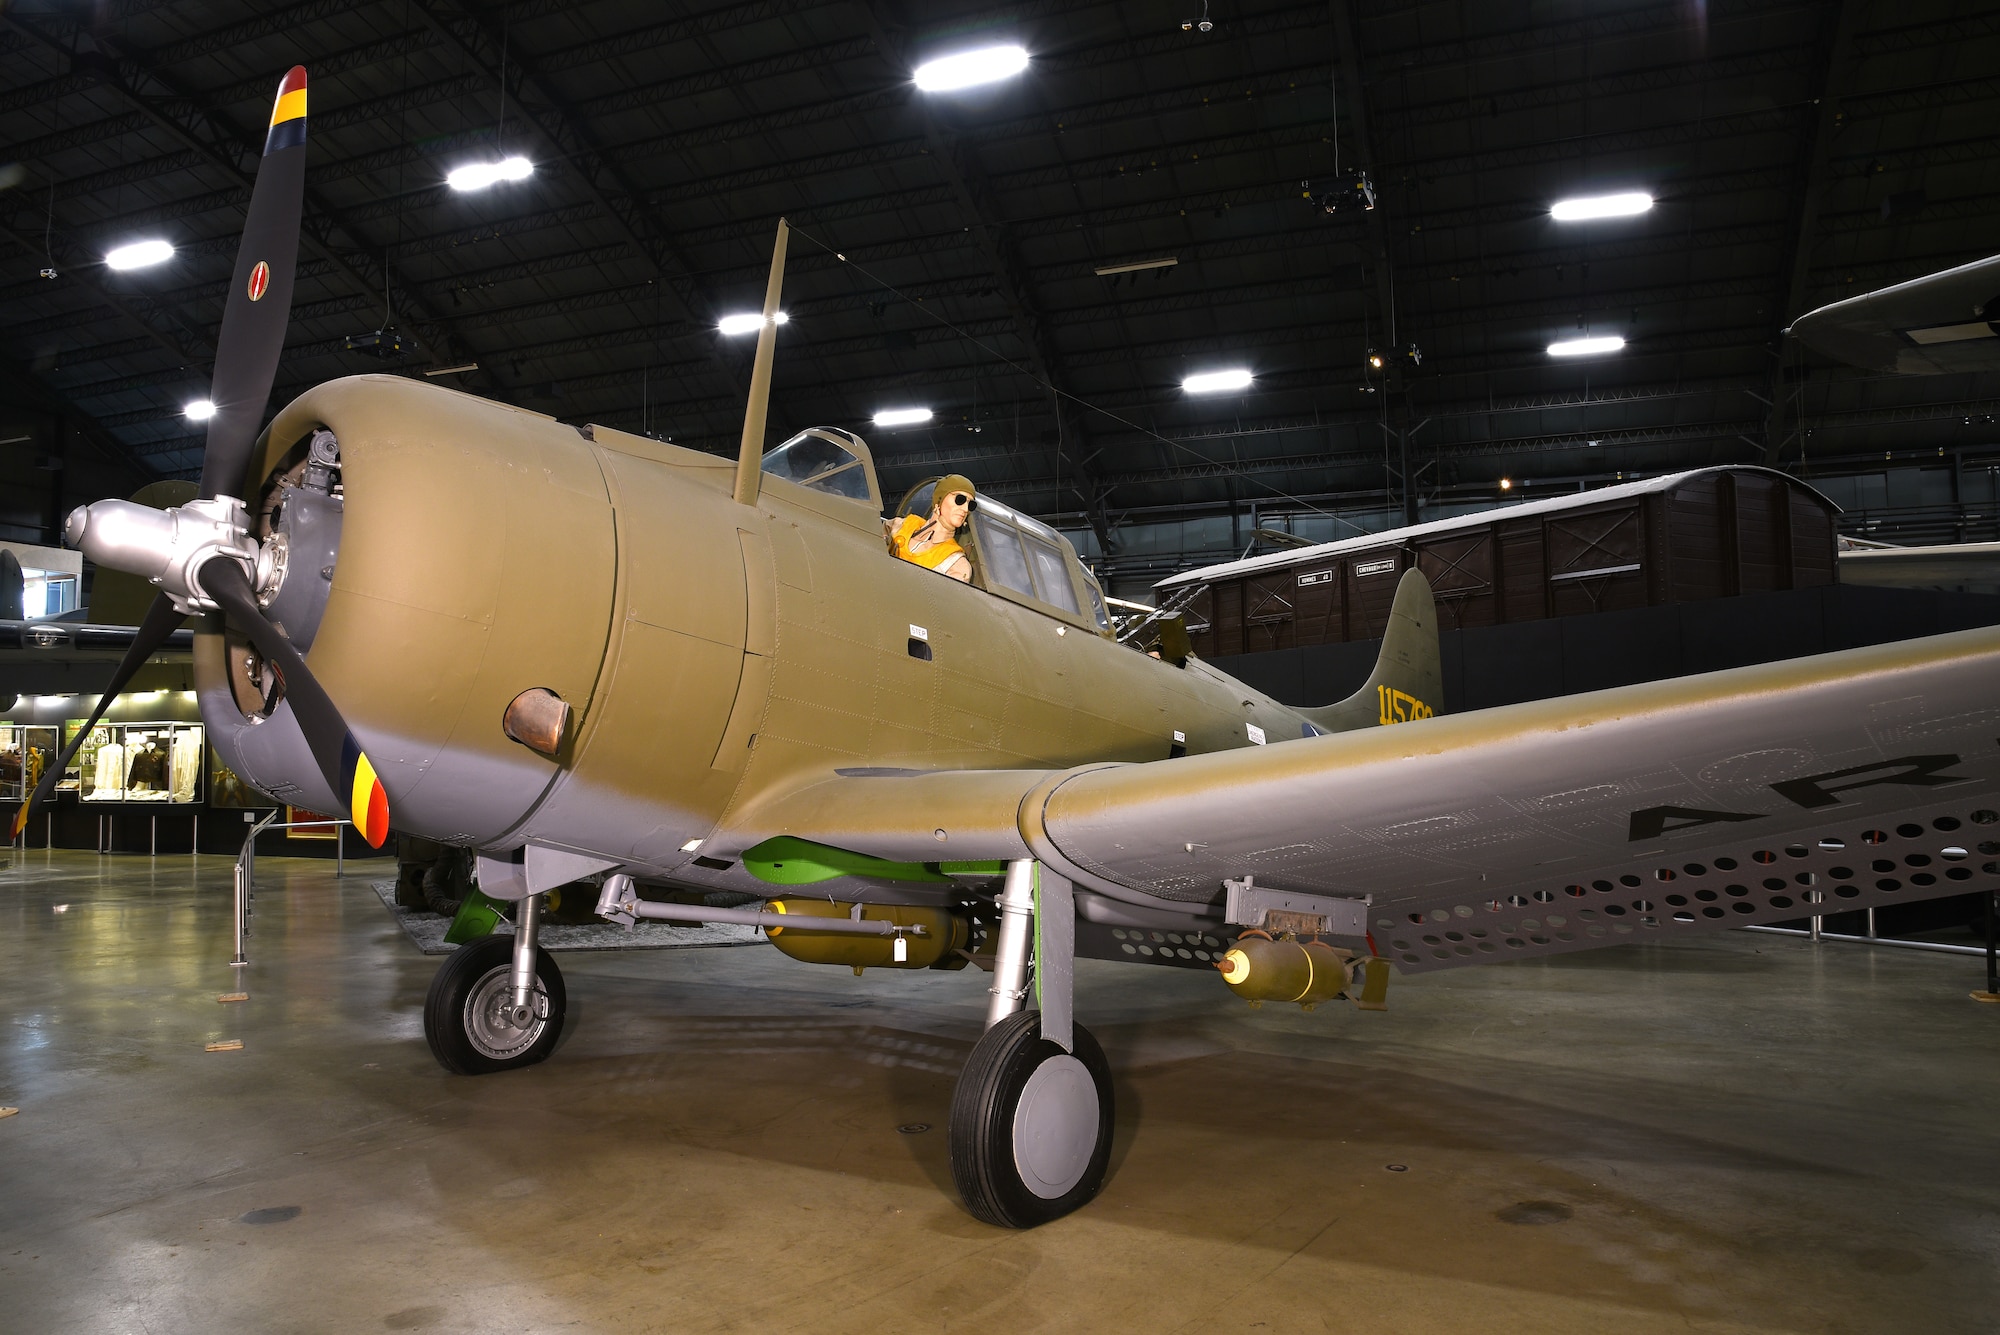 DAYTON, Ohio -- Douglas A-24 in the WWII Gallery at the National Museum of the United States Air Force. (U.S. Air Force photo by Ken LaRock)